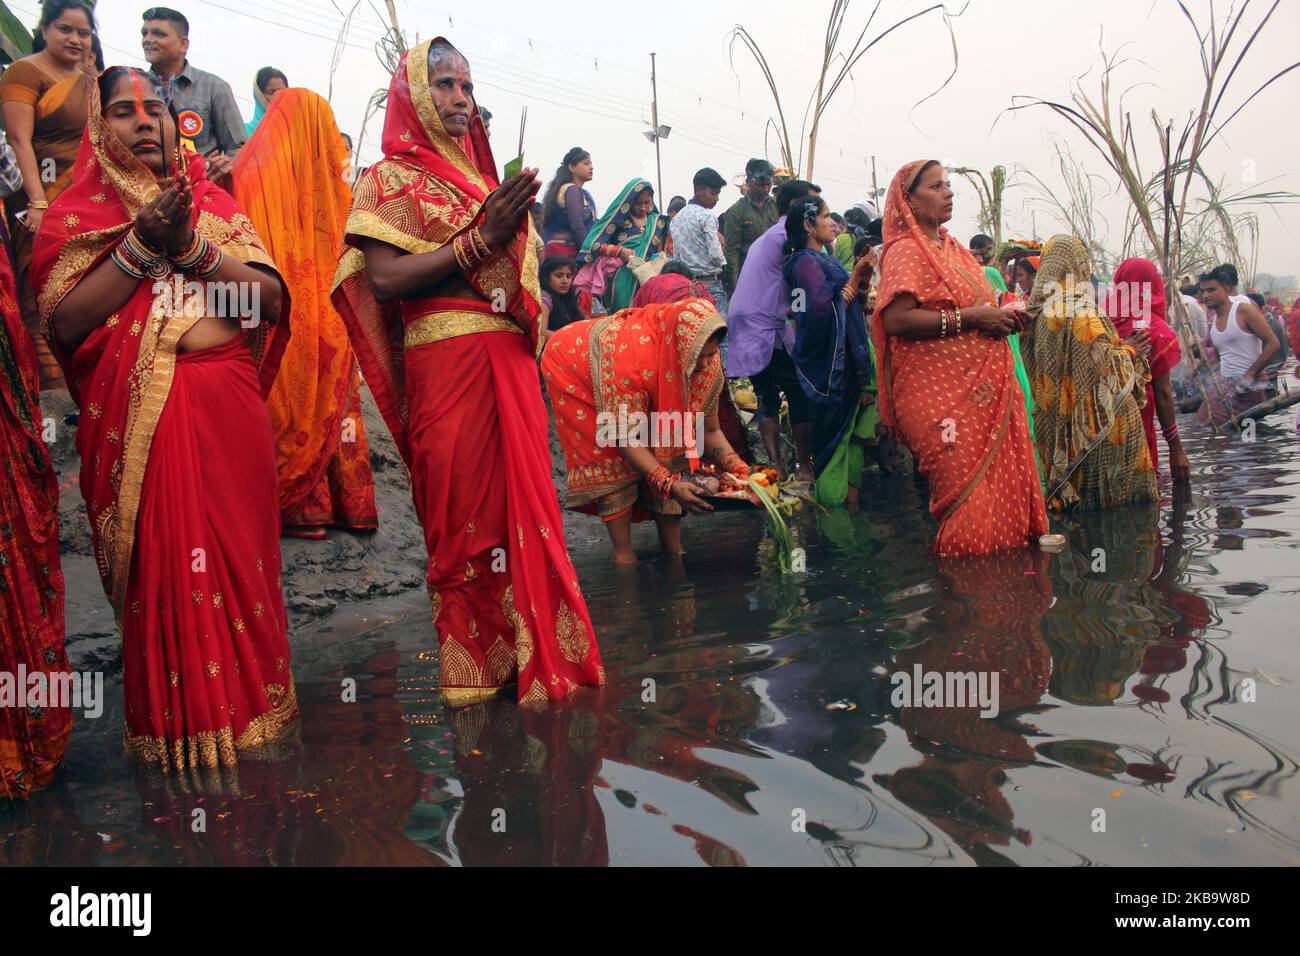 Hindu devotees are seen performing rituals and worshipping the Sun god along the banks of Yamuna River during the religious Hindu festival of Chhath Puja in New Delhi on November 13, 2018. The rituals involve taking dips in rivers or water bodies, strict fasting, standing and offering prayers in water, facing the sun for long periods and also offering Prasad to the sun at sunrise and sunset. (Photo by Mayank Makhija/NurPhoto) Stock Photo